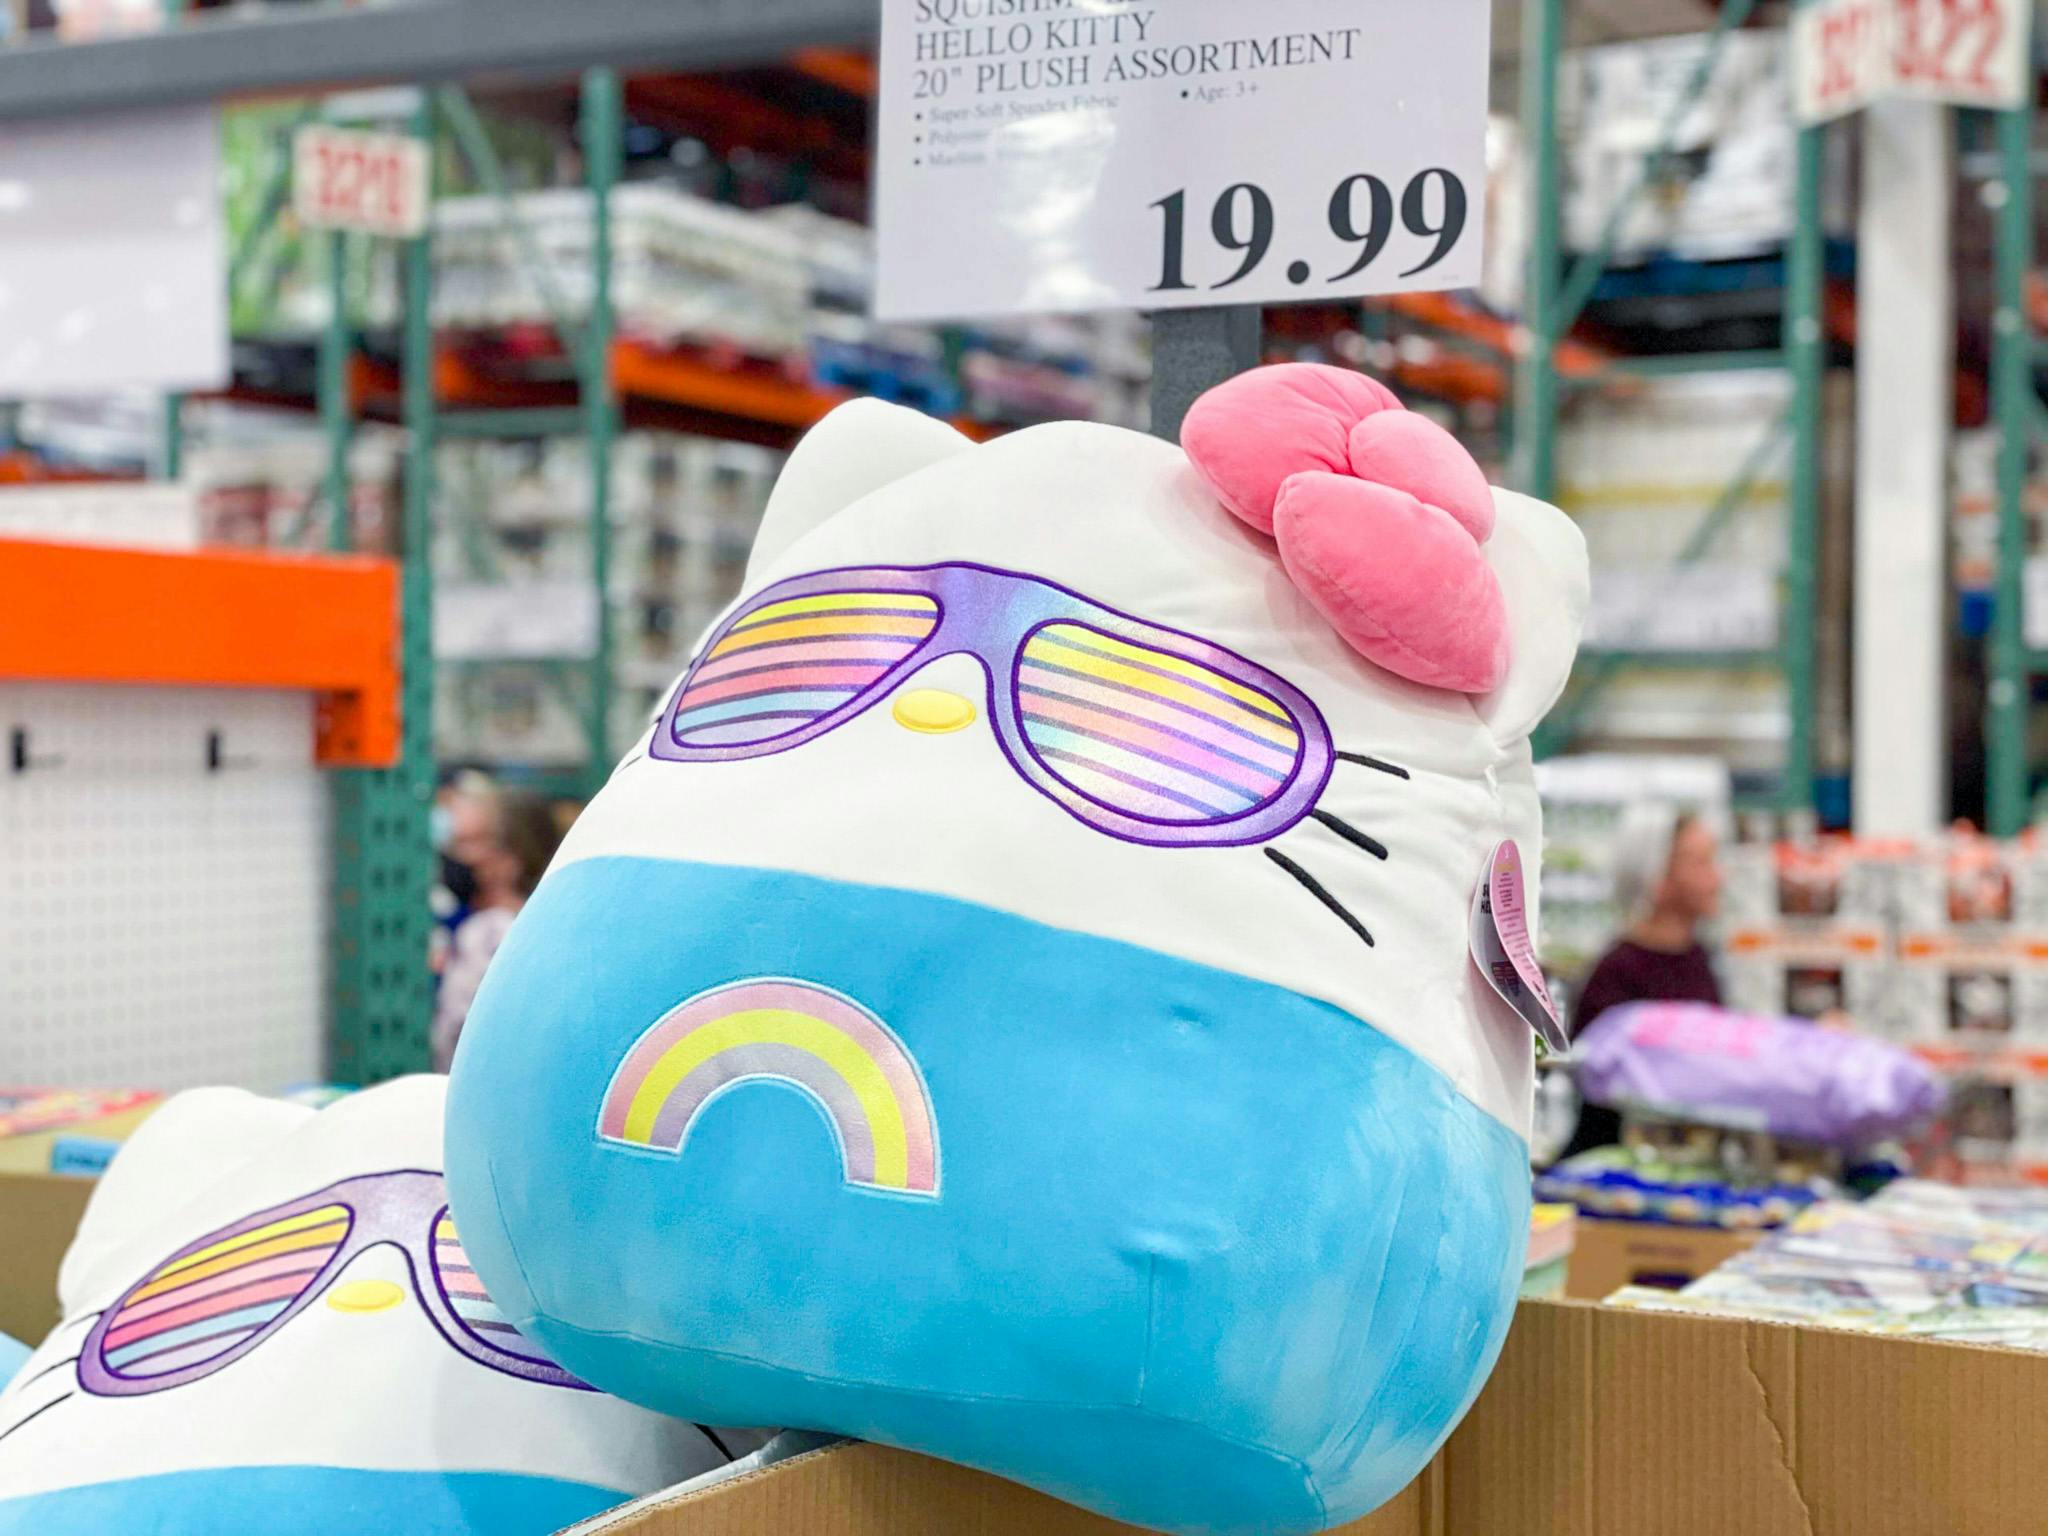 New Hello Kitty 20" Squishmallows Arriving in Costco Stores - Priced at